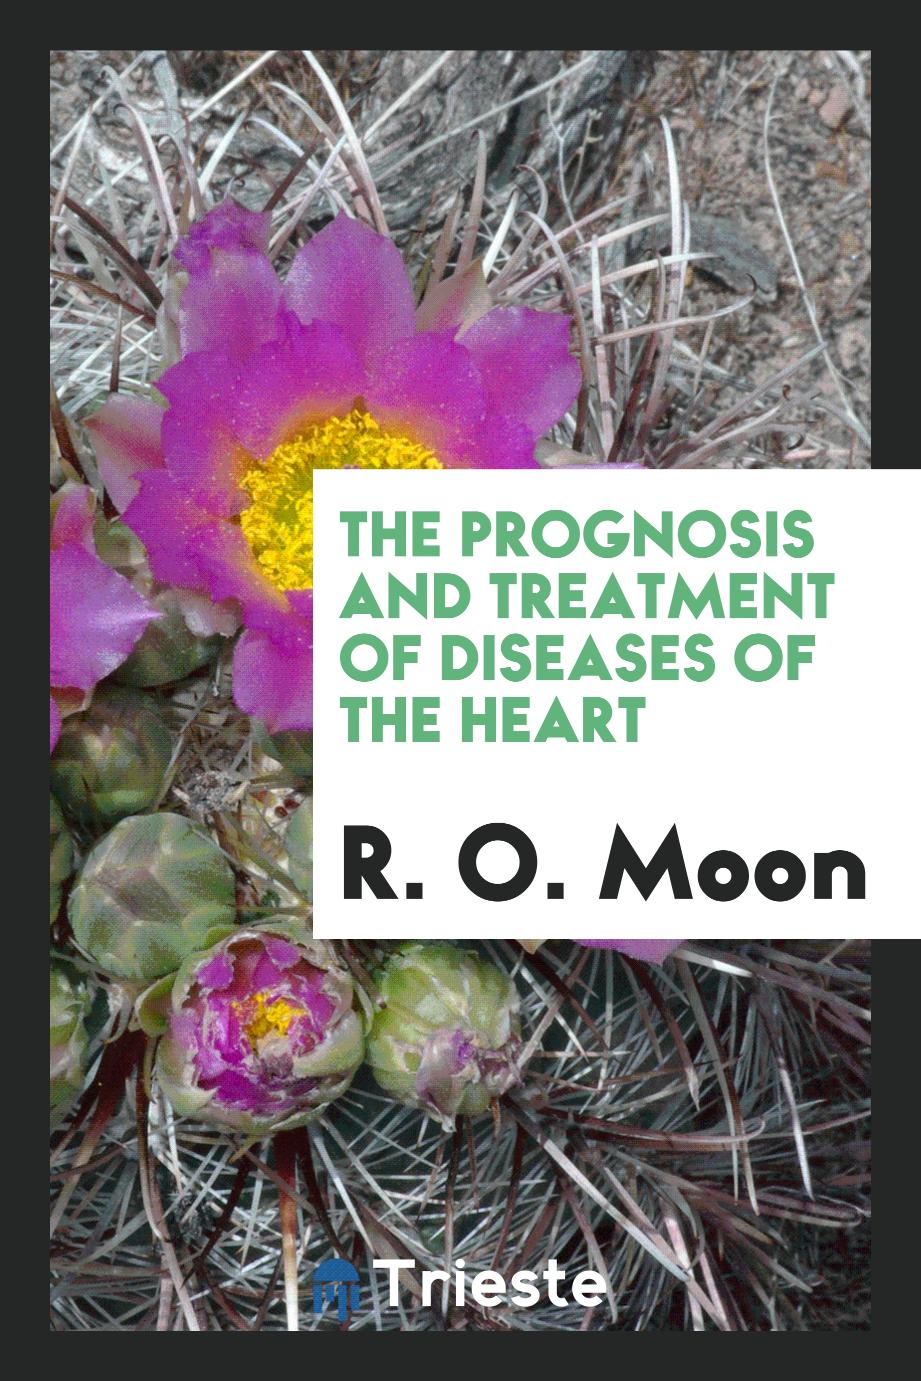 The Prognosis and Treatment of Diseases of the Heart